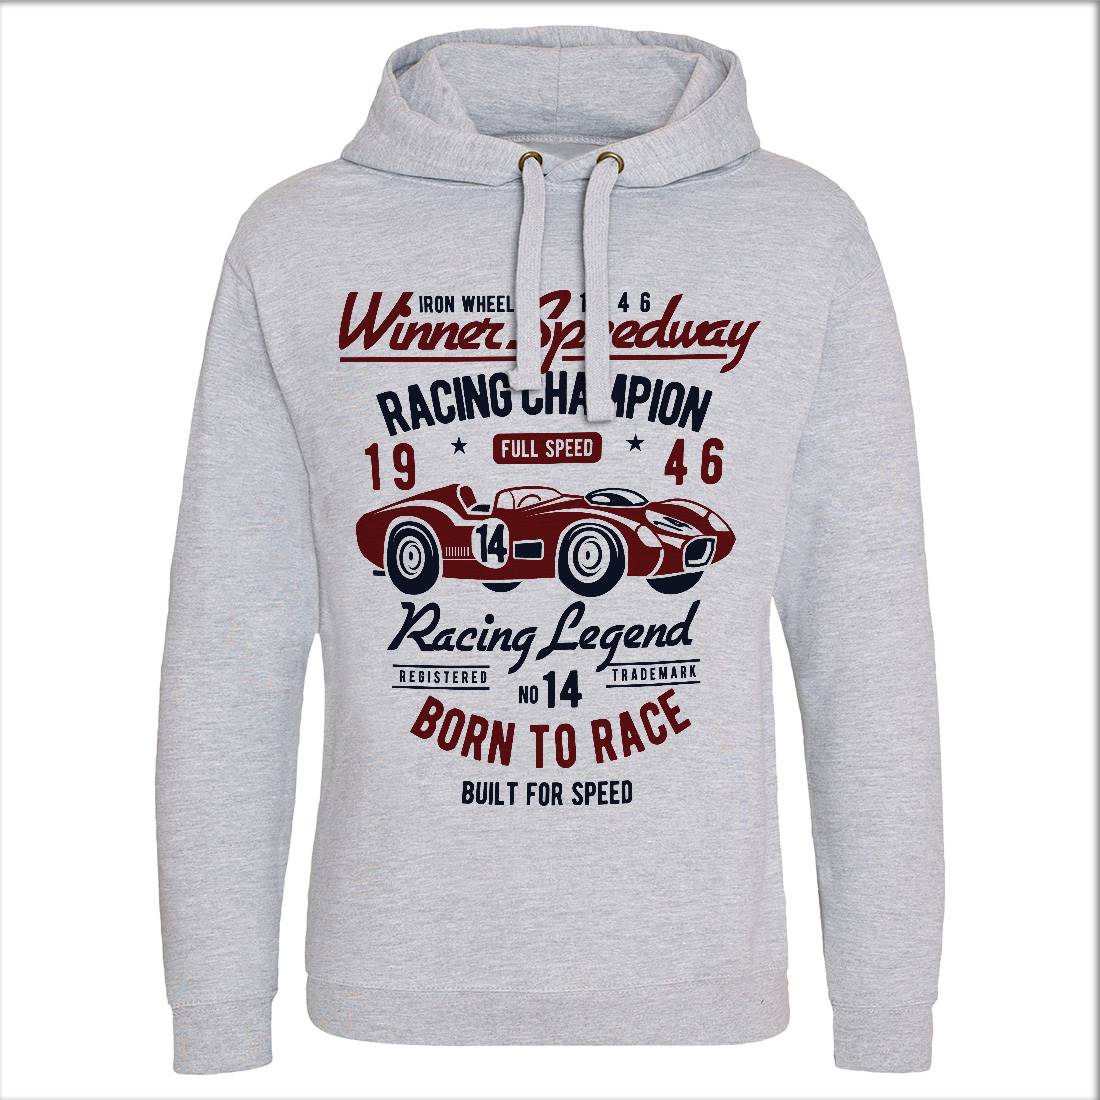 Winner Speedway Mens Hoodie Without Pocket Cars B476